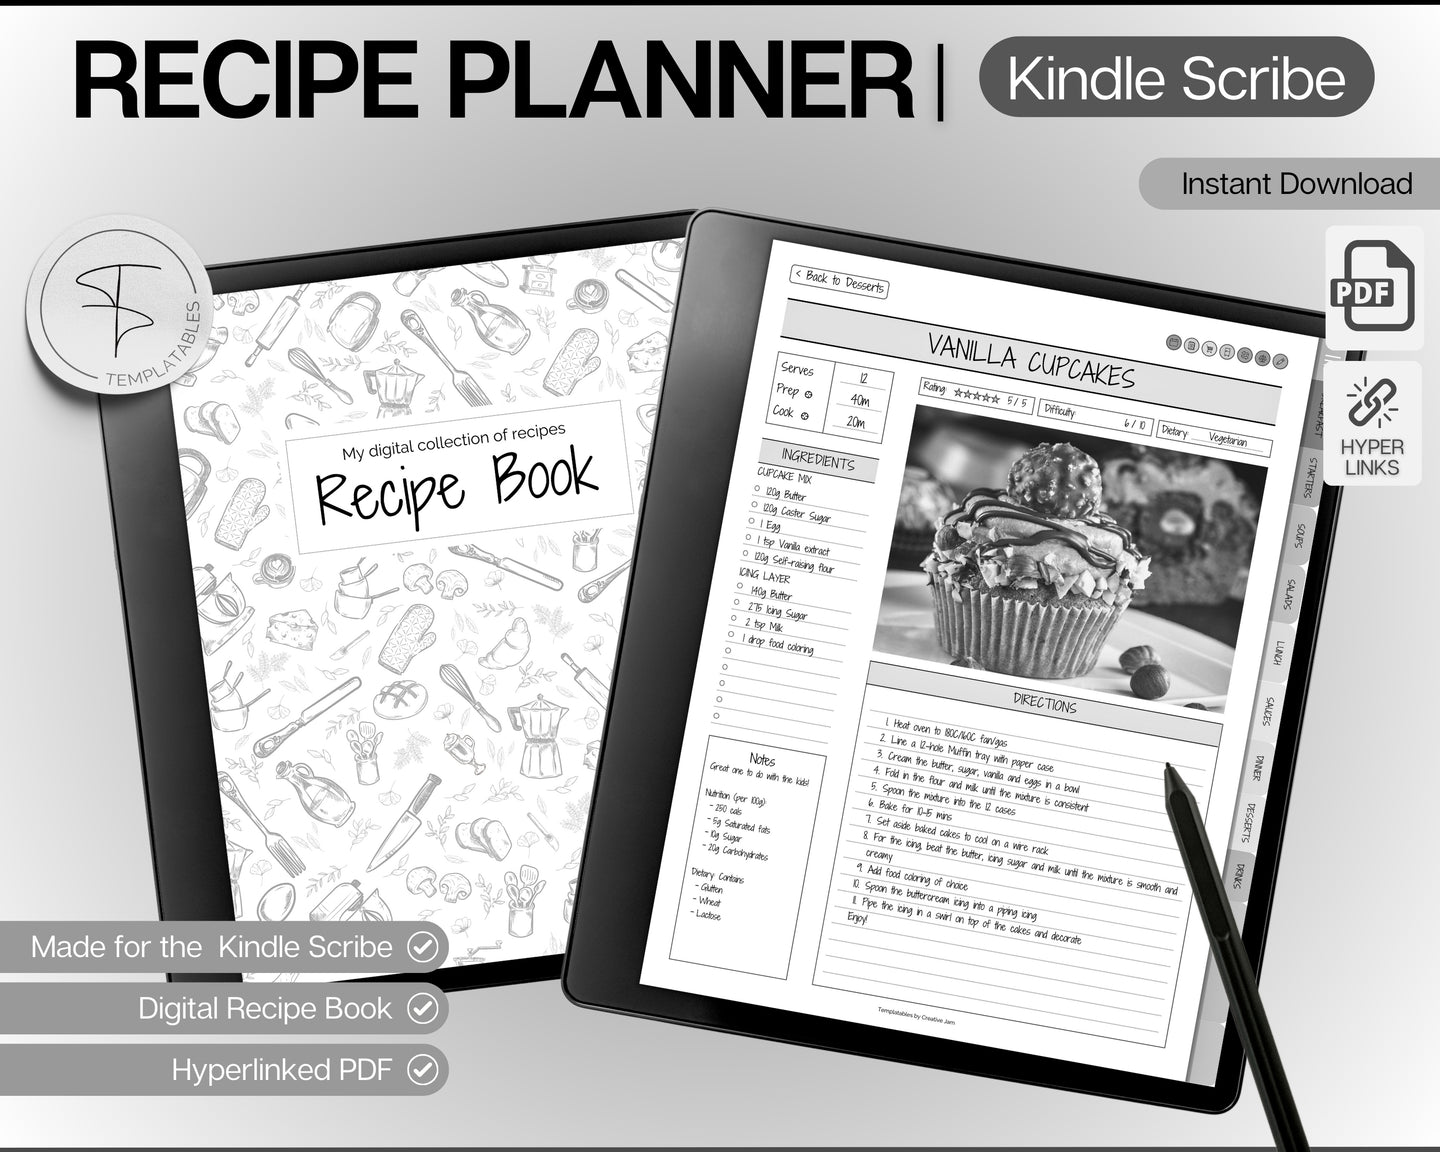 Digital Recipe Book for Kindle Scribe | Comes with Recipe Templates, Digital Meal Planner, Cookbook Template, Recipe Binder Kit & Blank Recipe Card